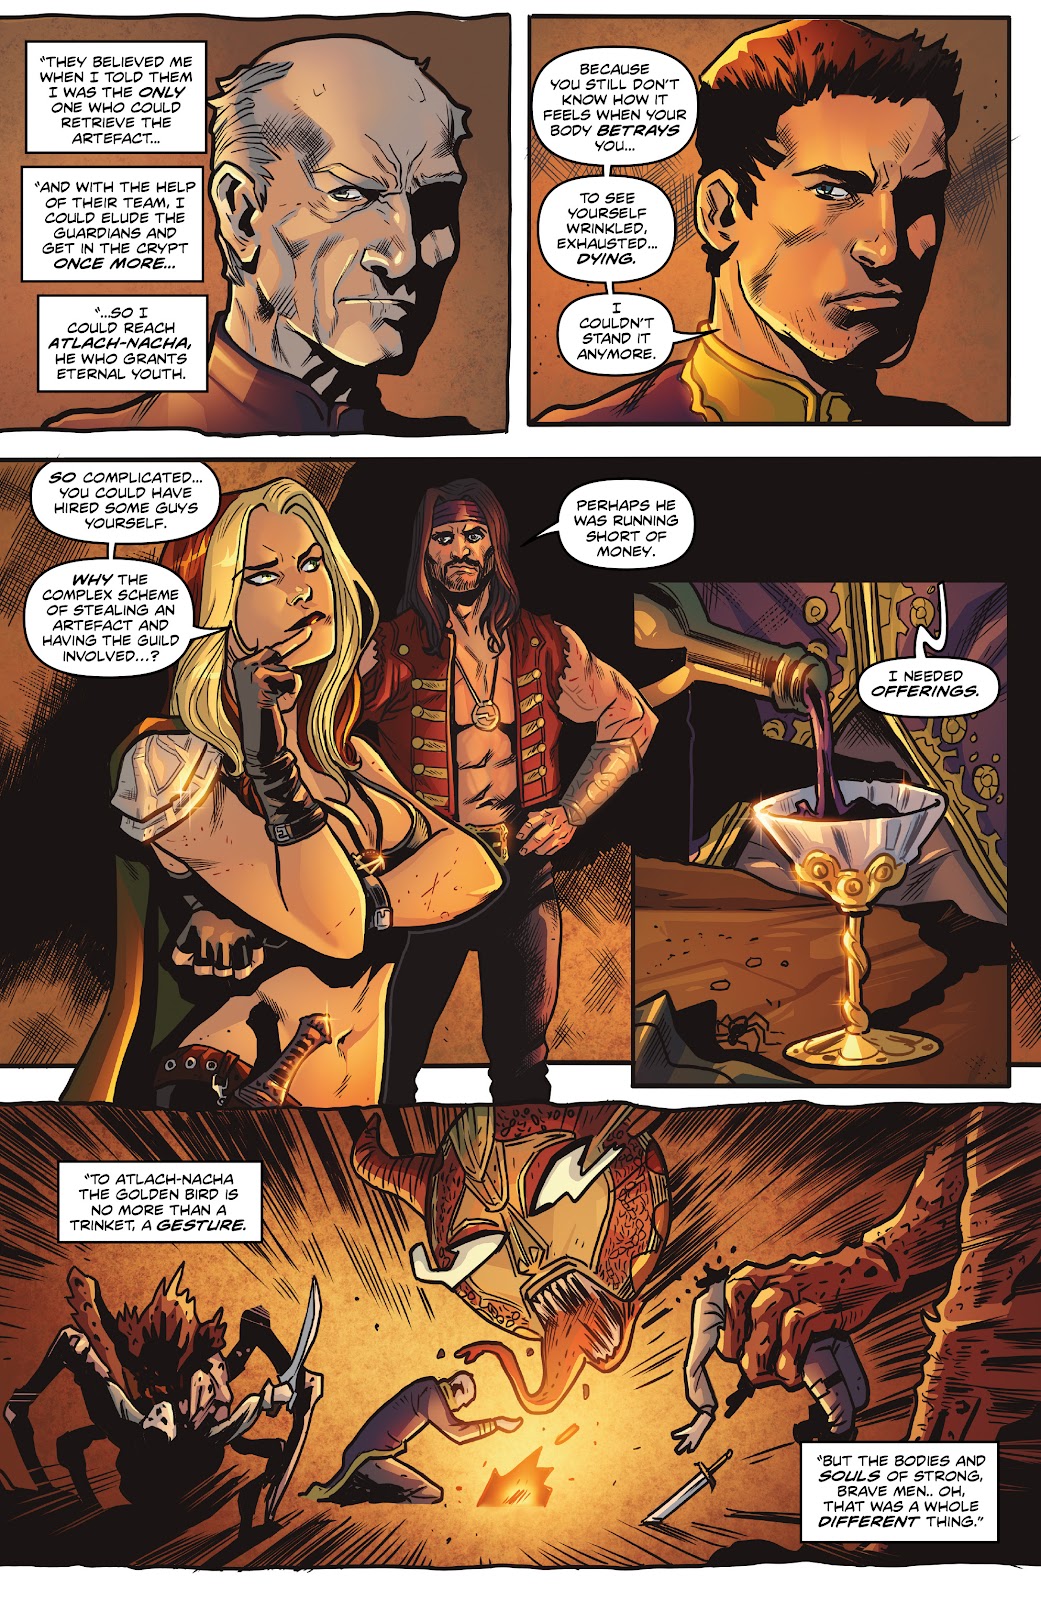 Rogues!: The Burning Heart issue 5 - Page 12